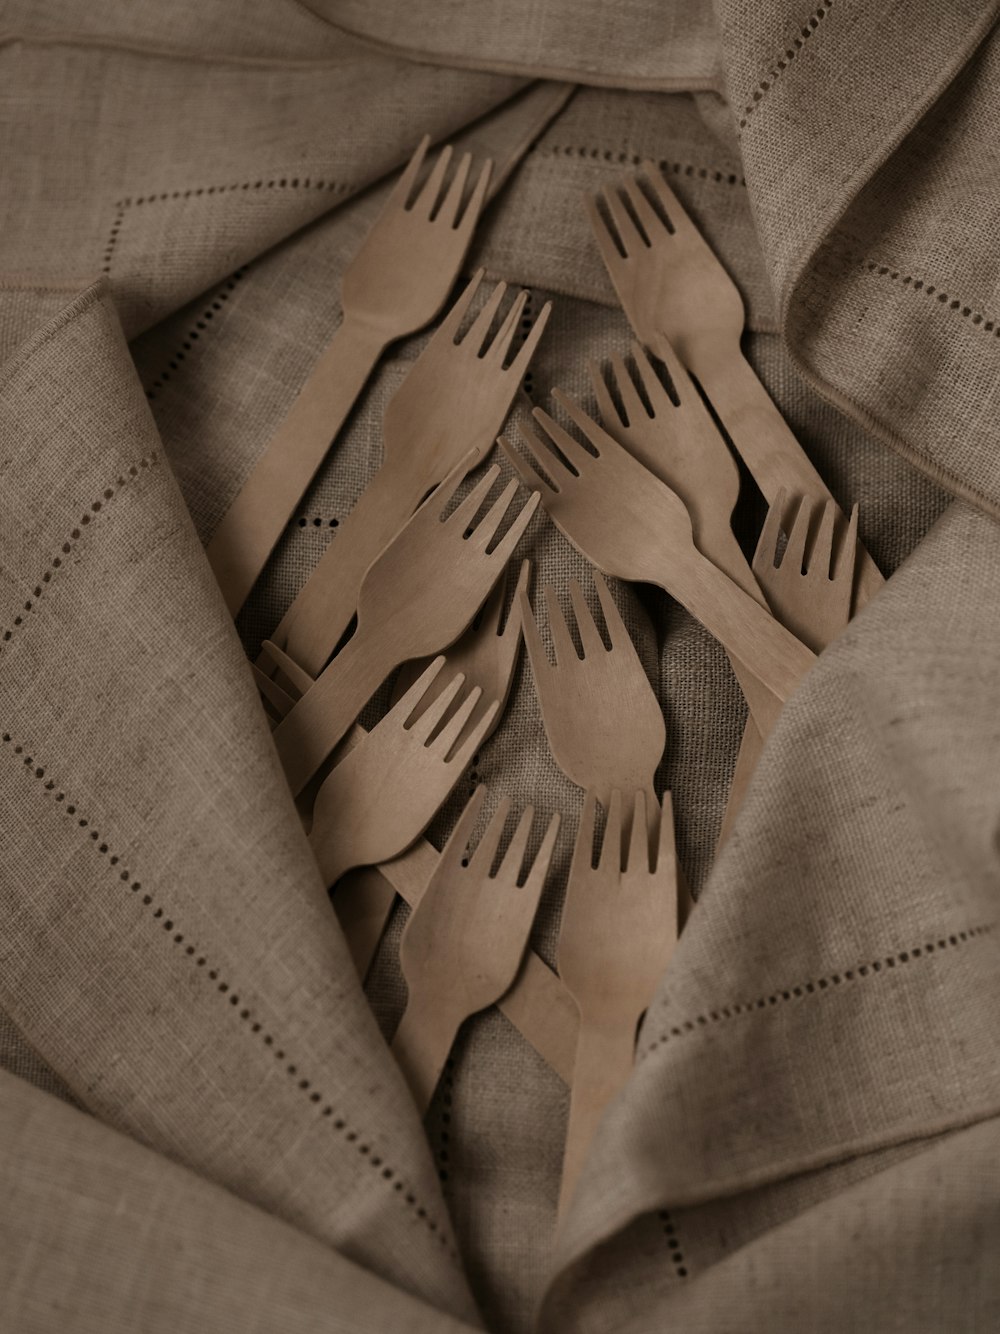 a pile of forks and spoons sitting on top of a cloth